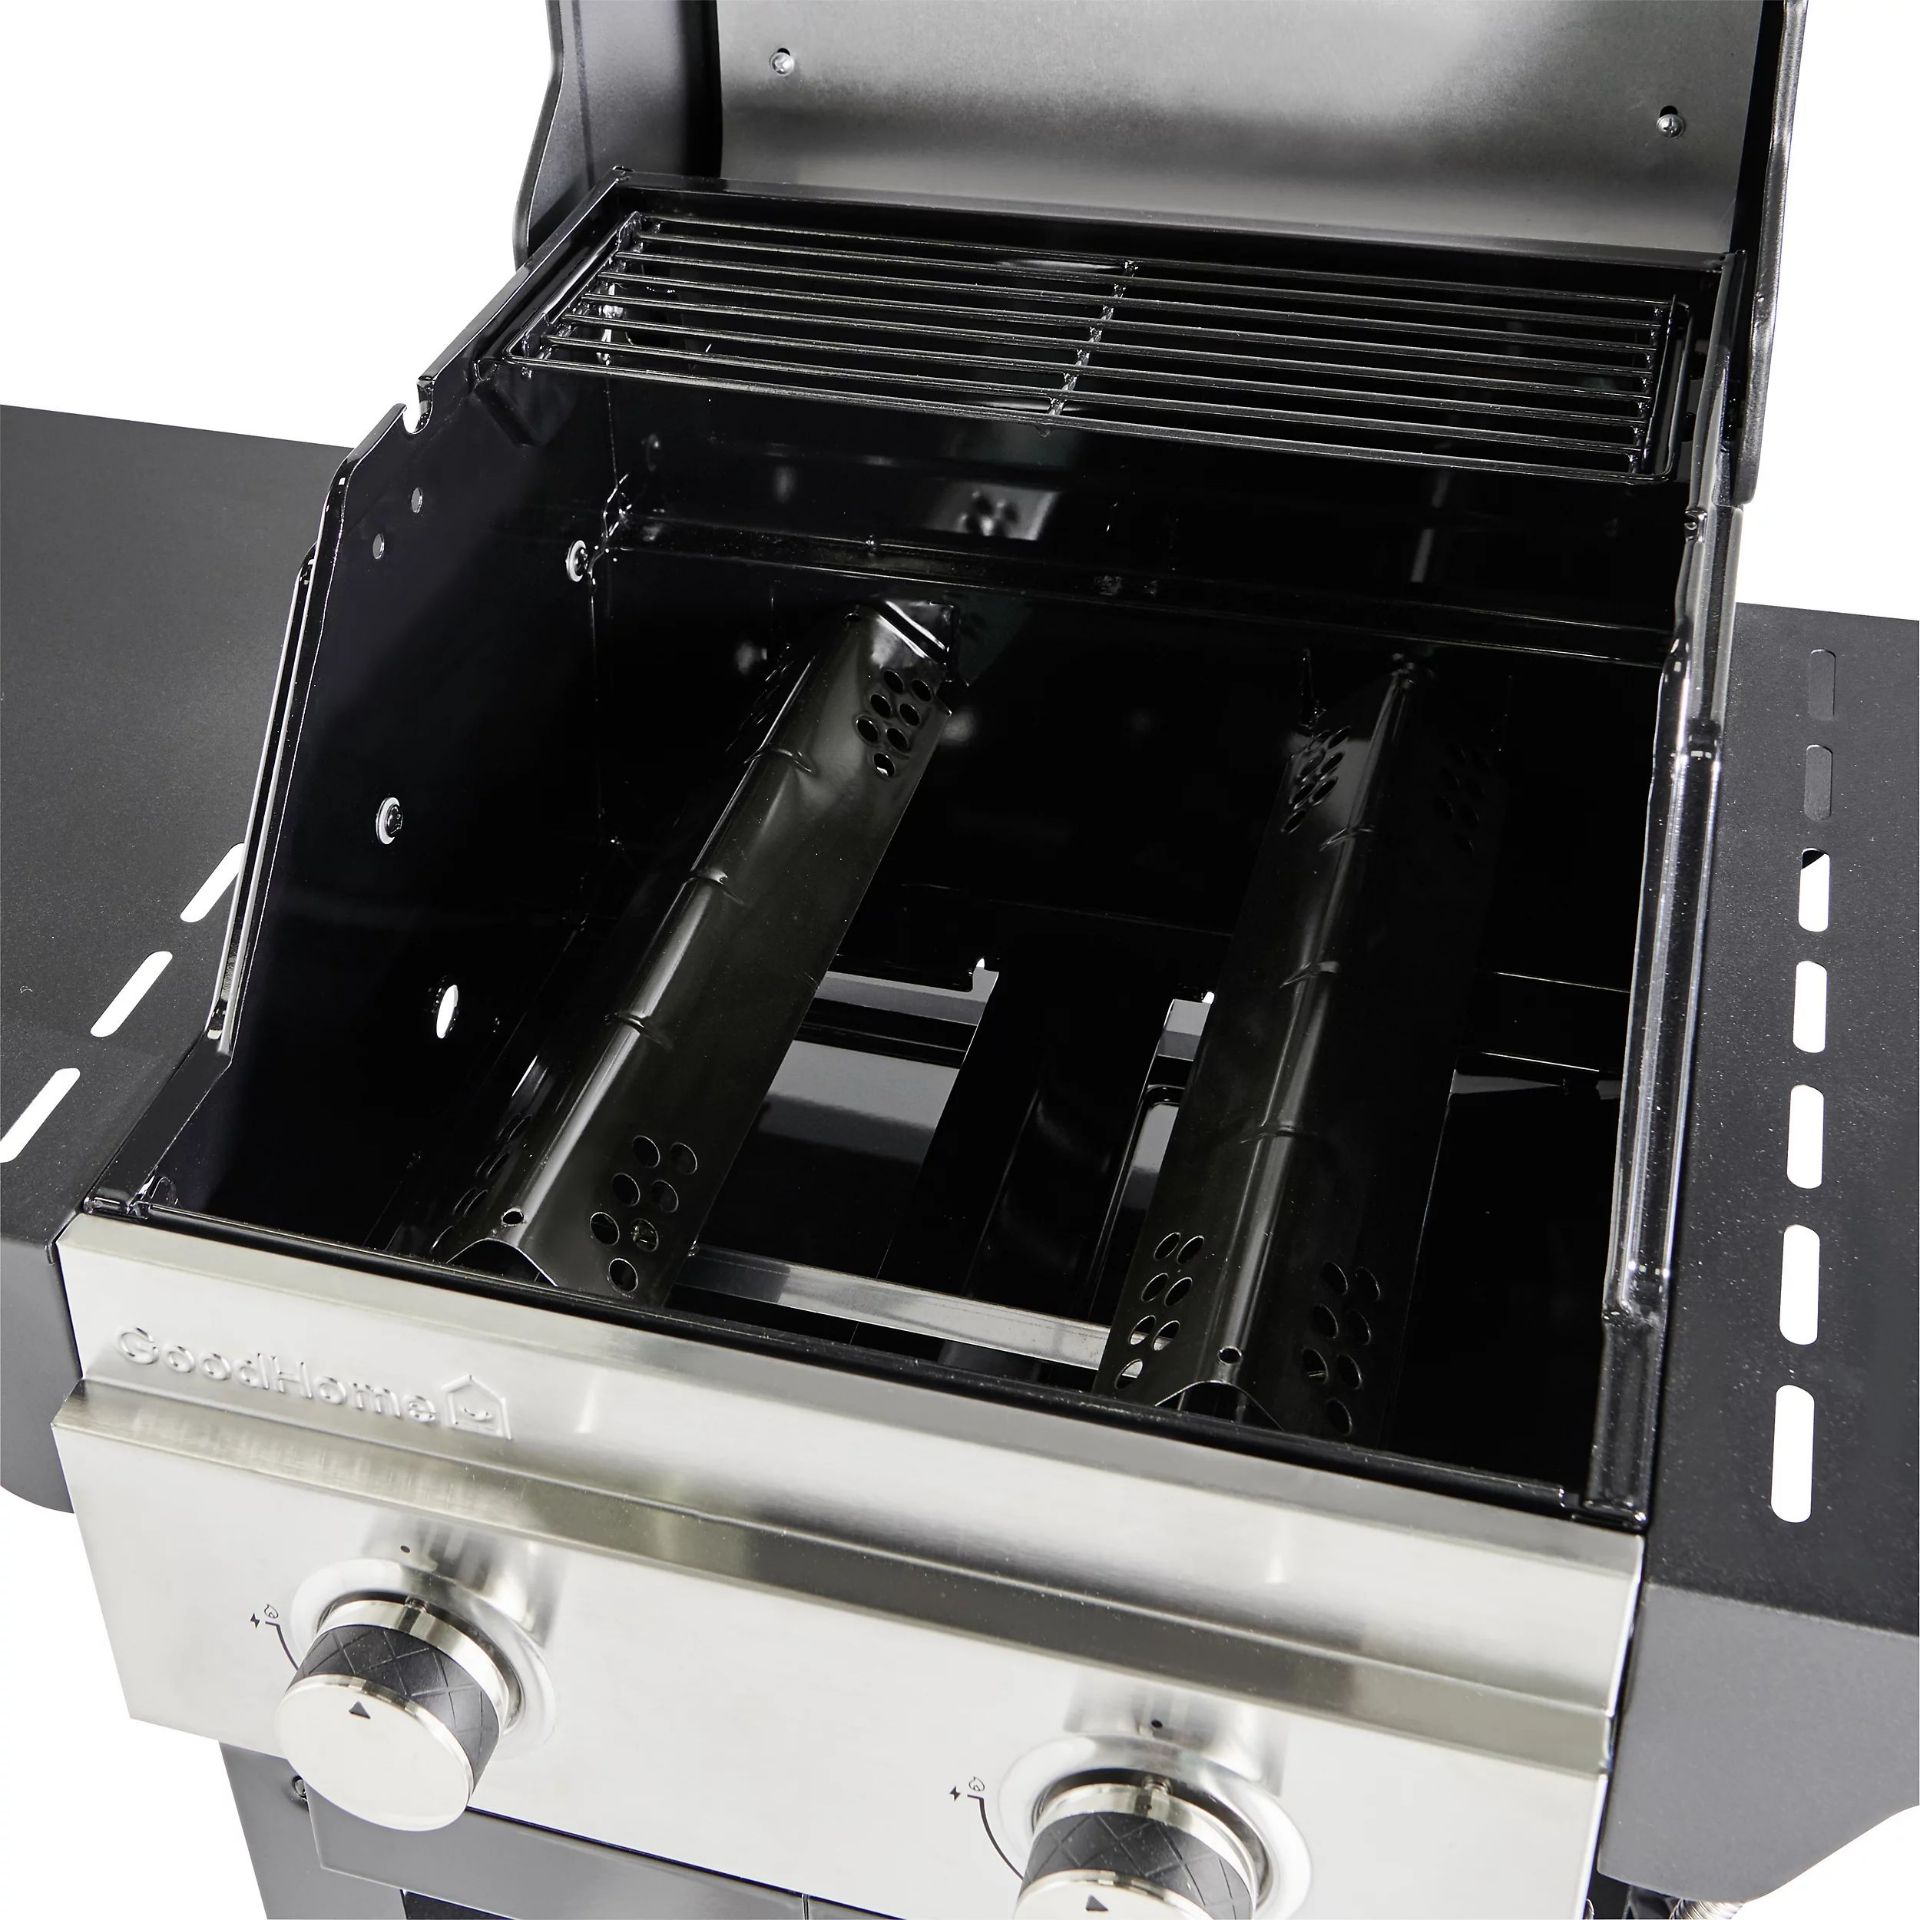 BRAND NEW OWSLEY 2.0 BLACK 2 BURNER GAS BBQ R15-4 - Image 8 of 10